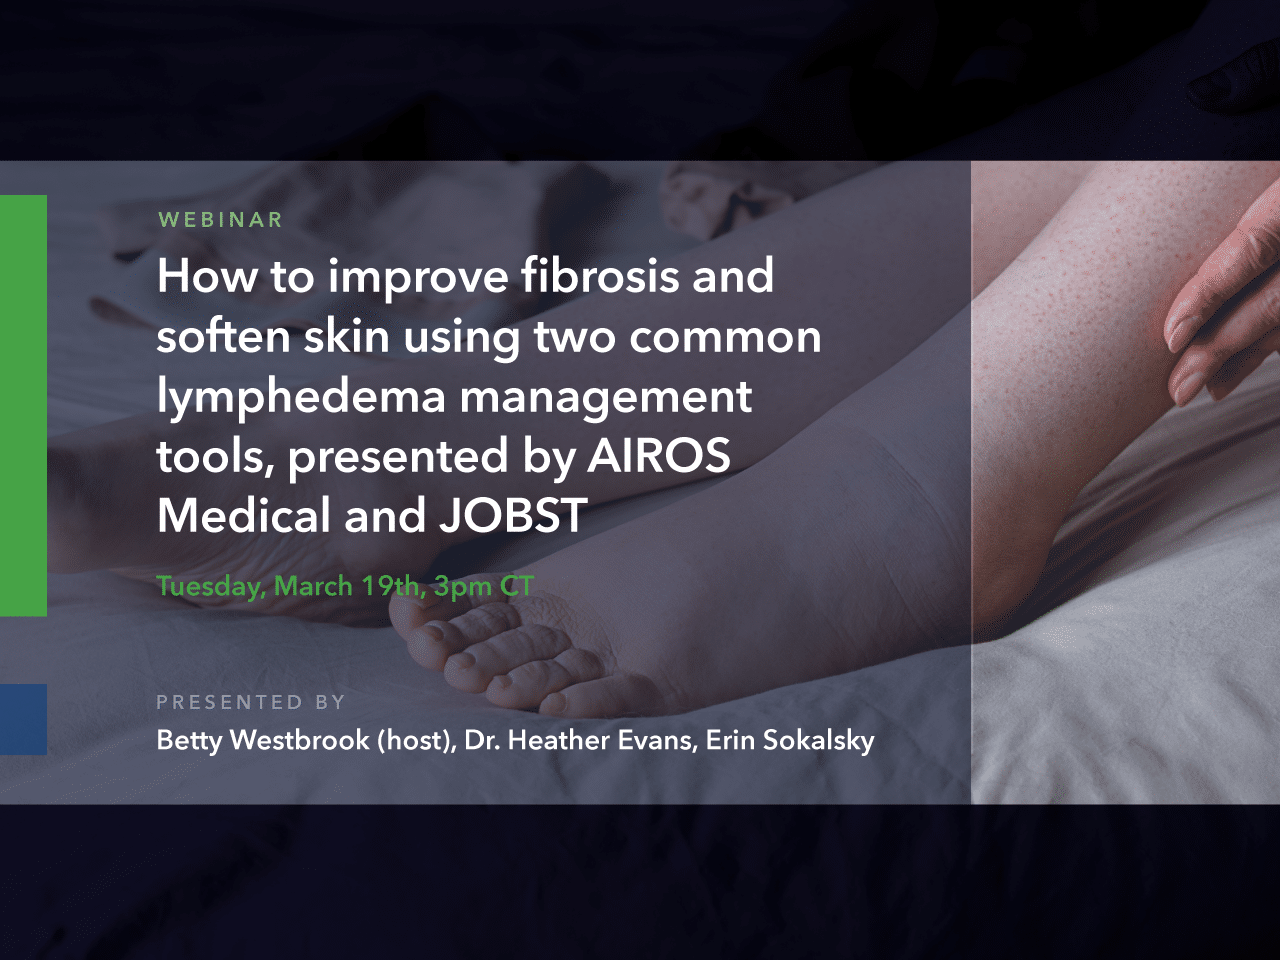 AIROS Medical Launches AIROS 6P Pneumatic Compression Device and Truncal  Garment System - AIROS Medical, Inc.